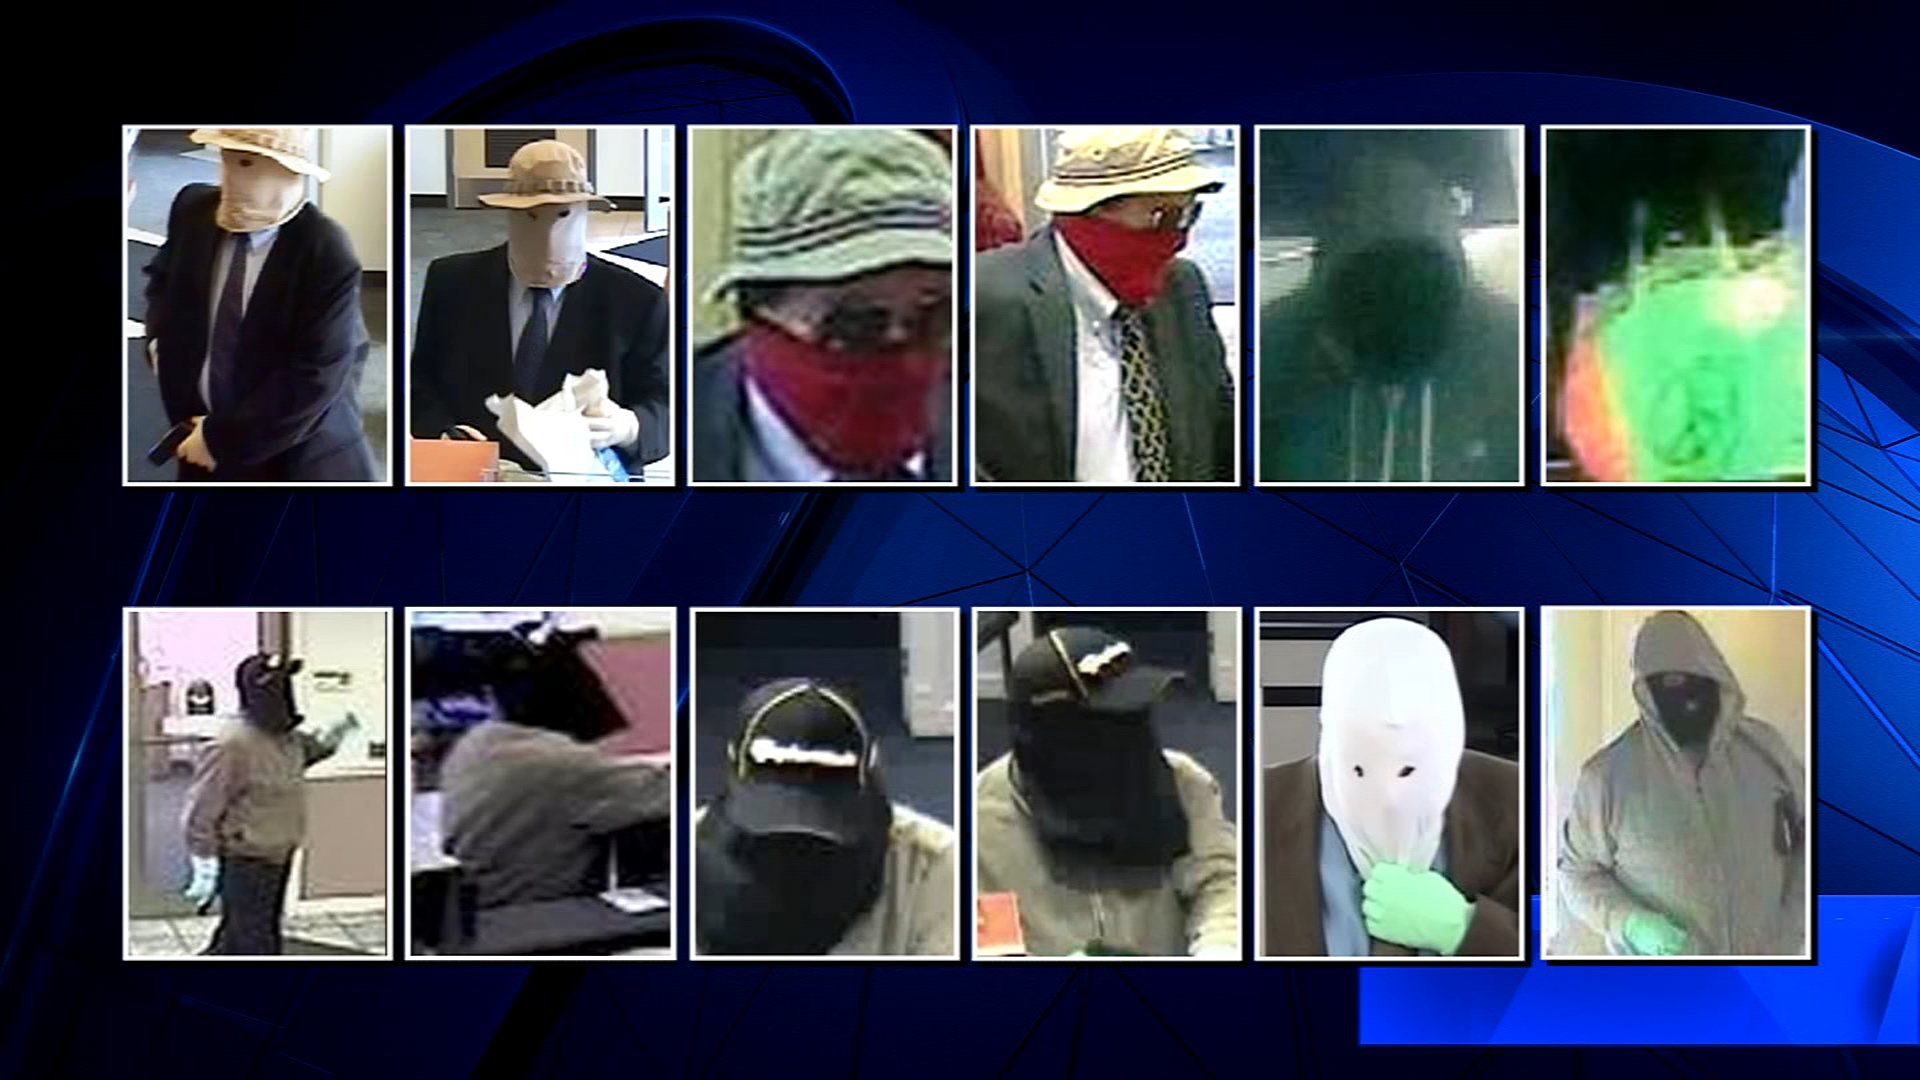 ‘Straw Hat Bandit' Gets 71-year Sentence for Suburban Philly Bank
Heists